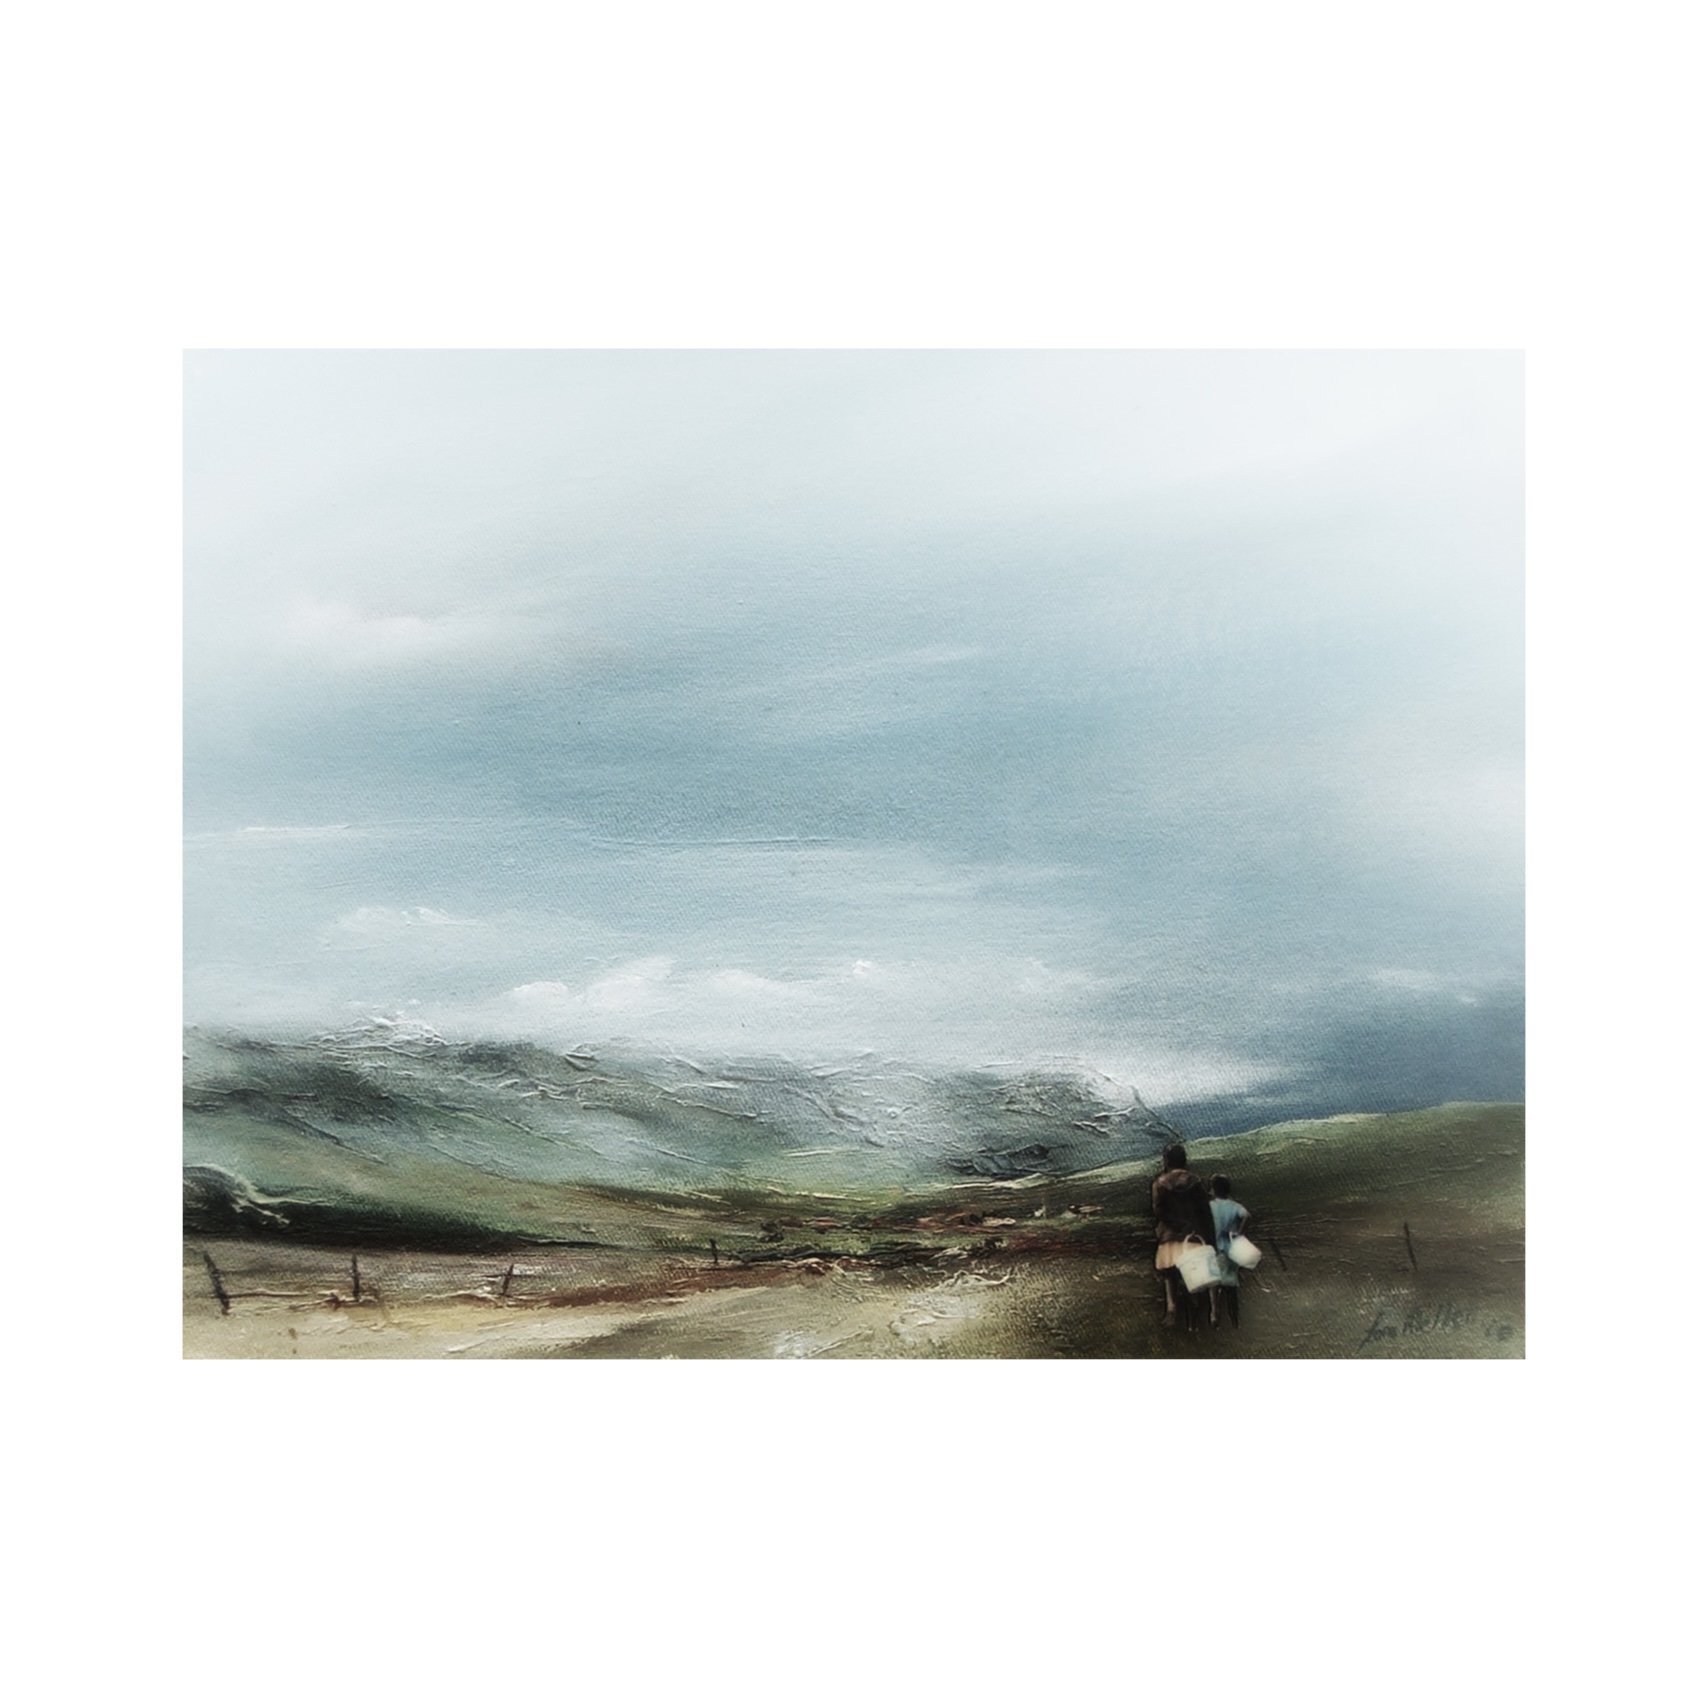 Clarens Gentle Slopes - Oil on Canvas with photo image - 23x30cm - wb.JPG